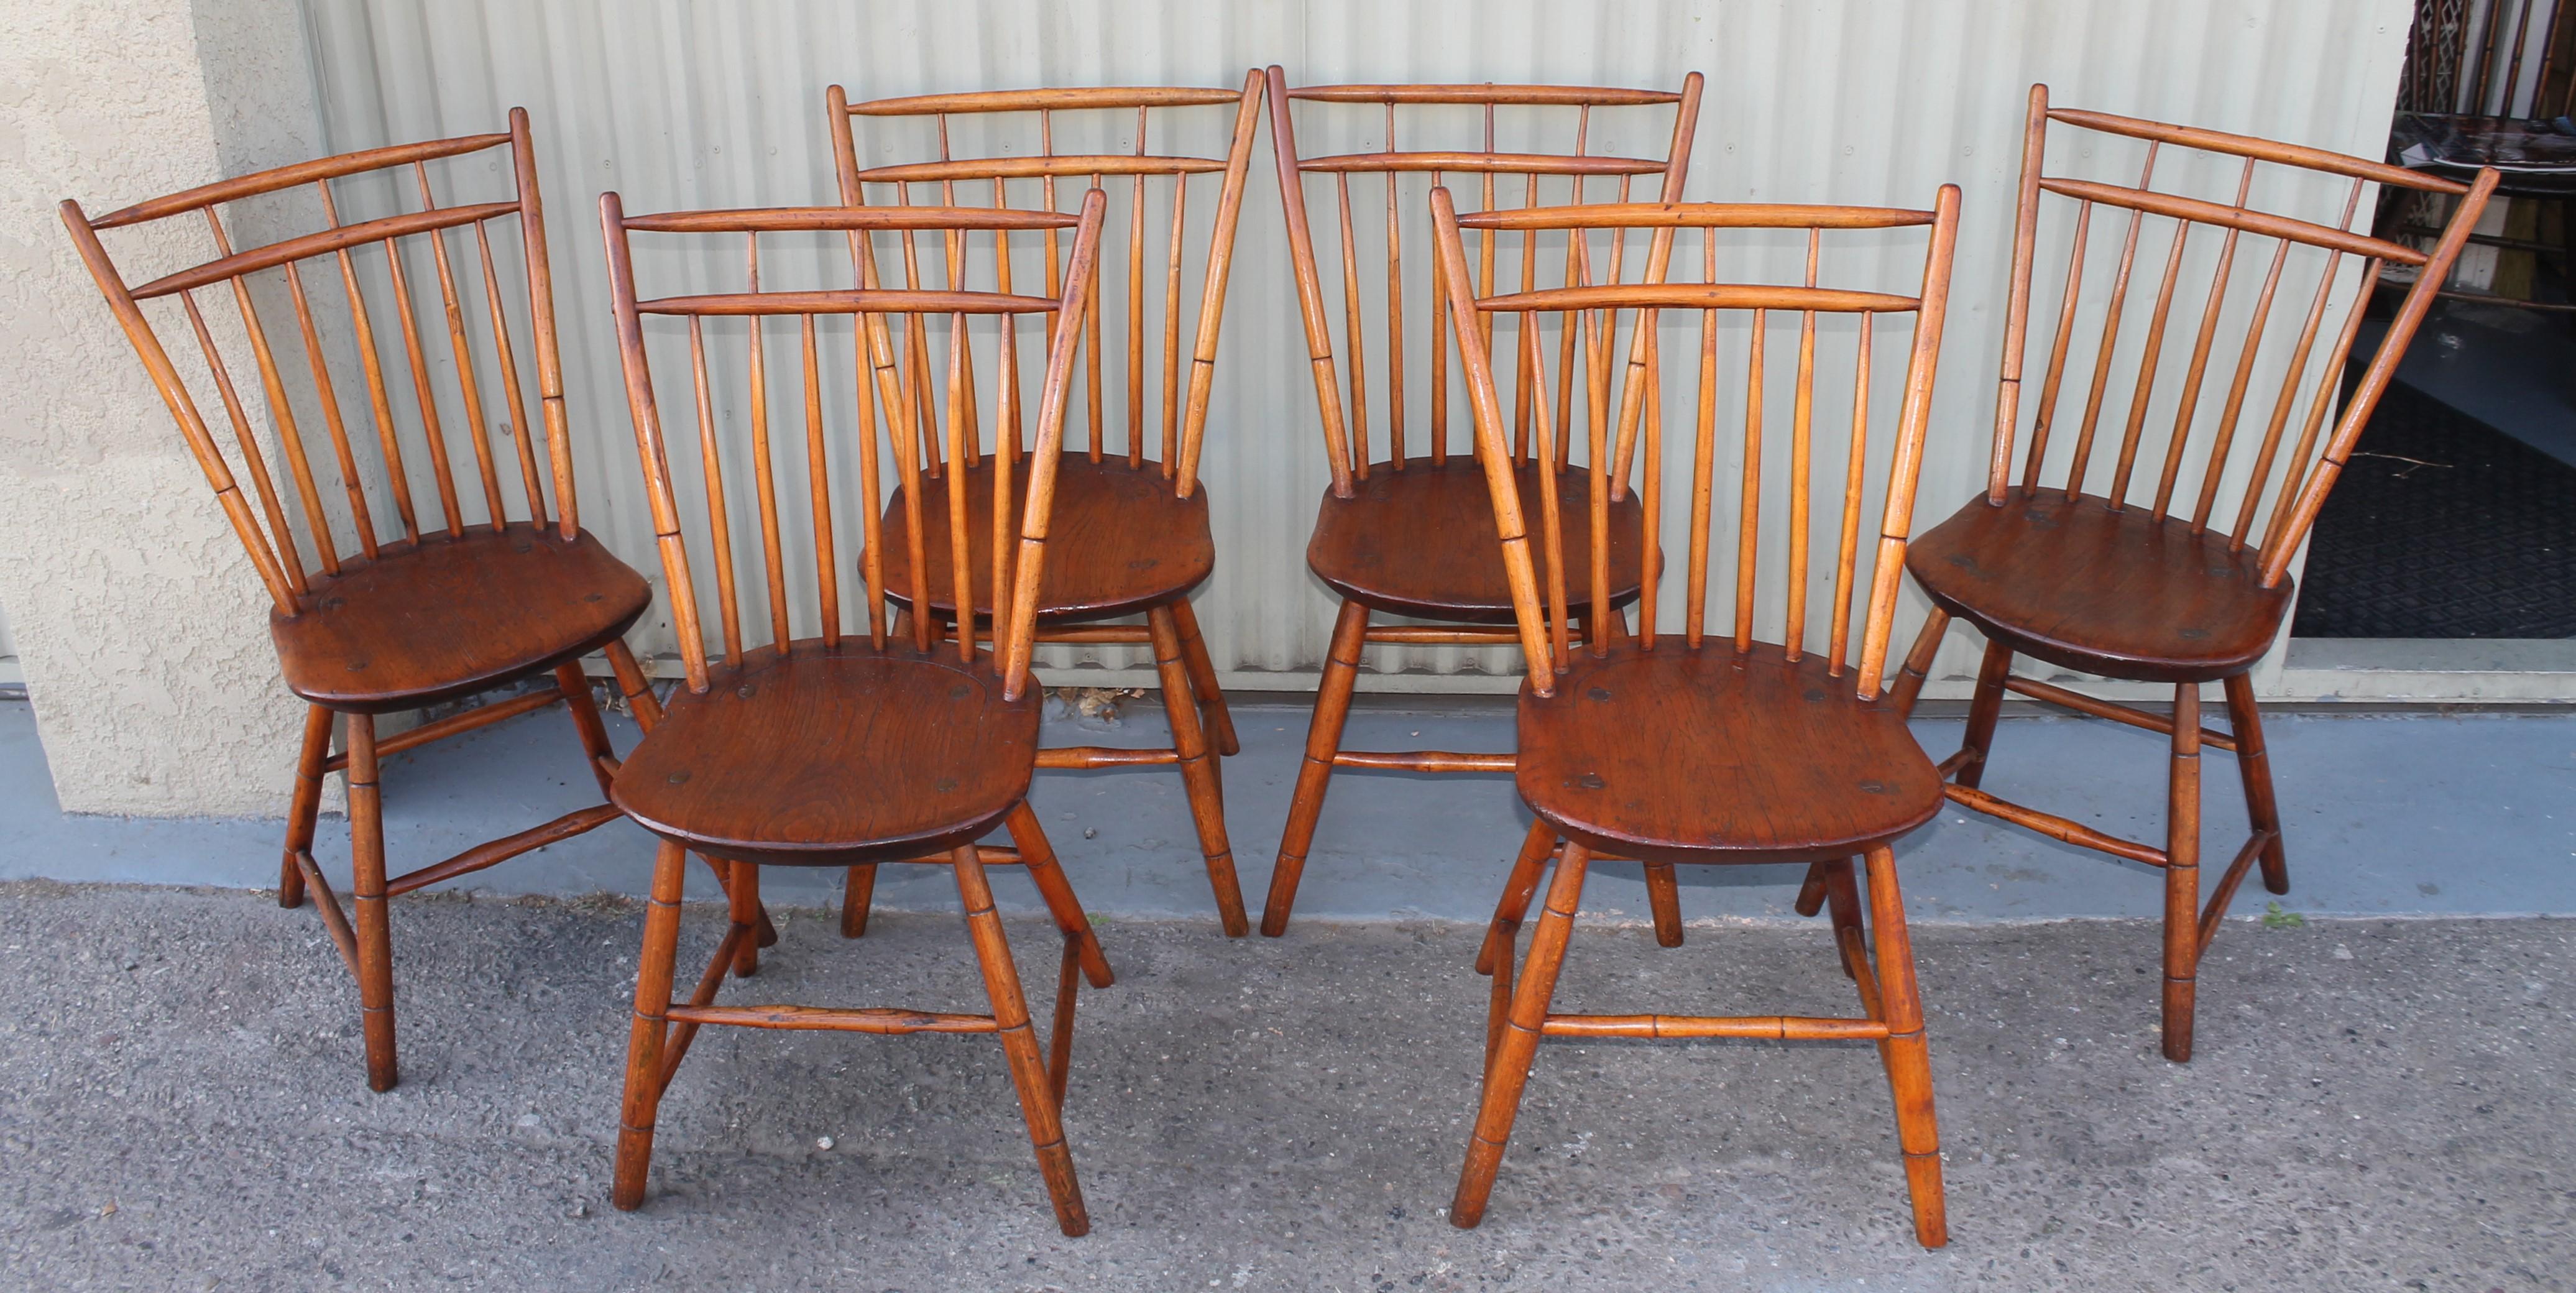 These Birdcage step down Windsor chairs were found in New England from a private collection and are in amazing condition. The woods are pine & hickory with a wonderful aged patina. The chairs are in very sturdy condition.